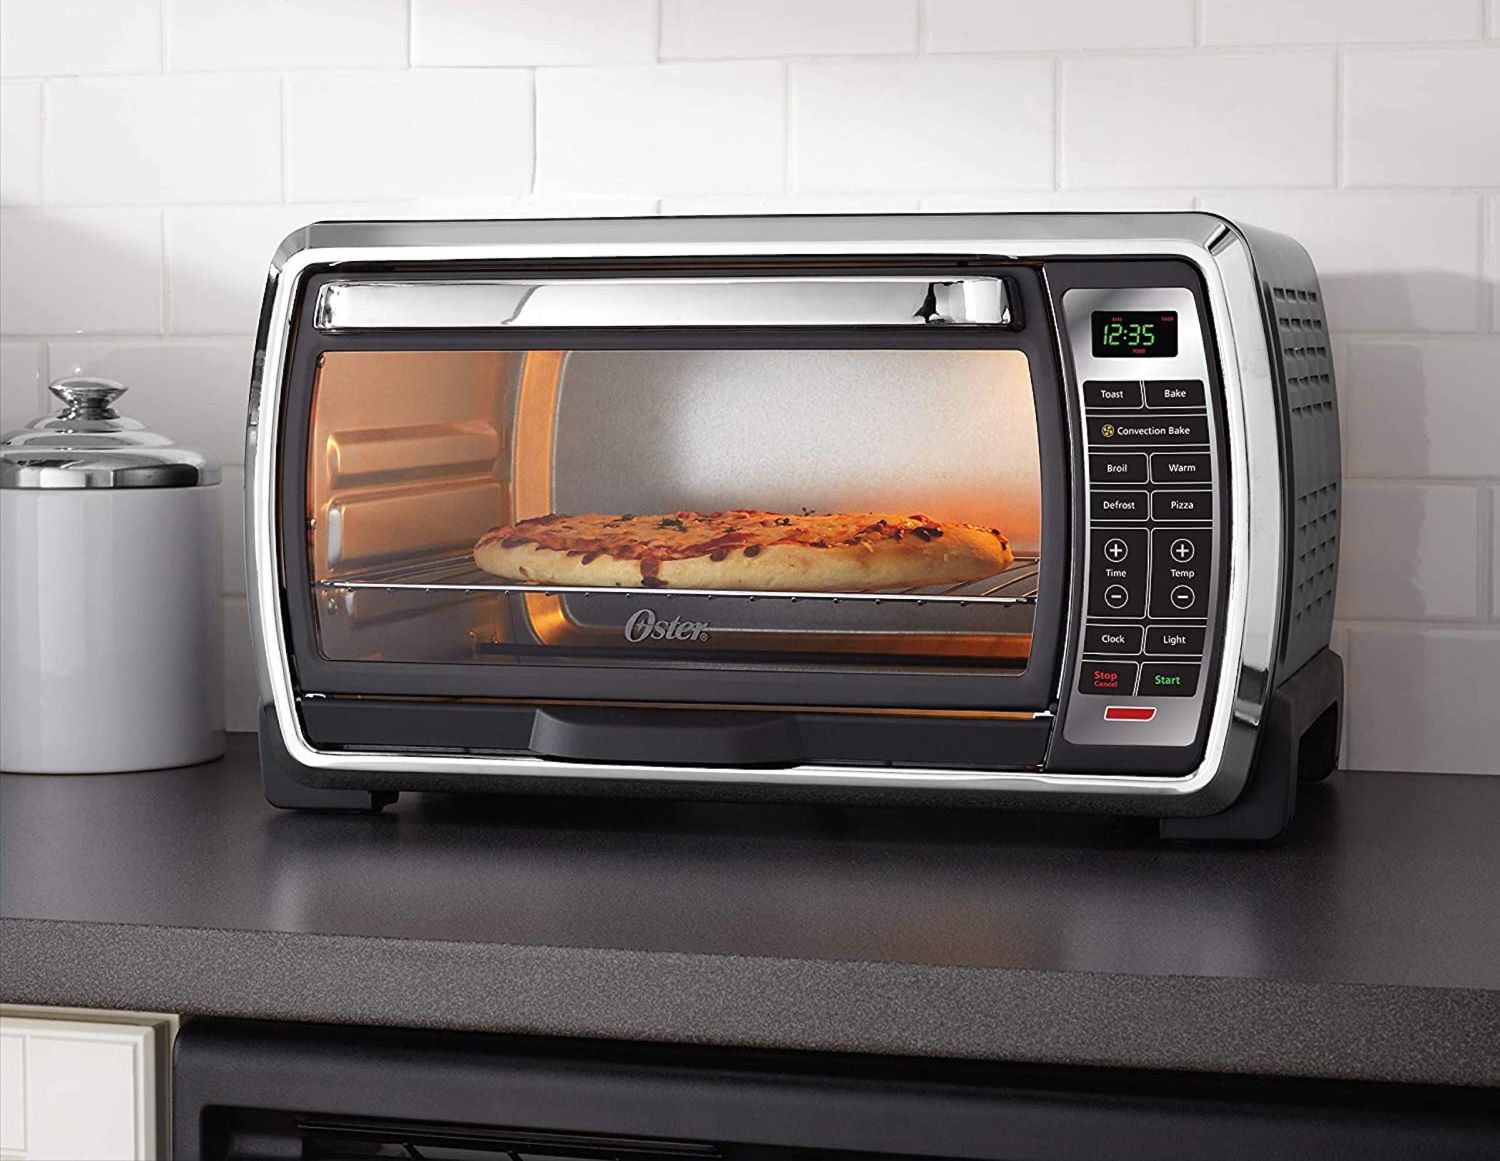 how-to-bake-in-the-oster-1000-watt-microwave